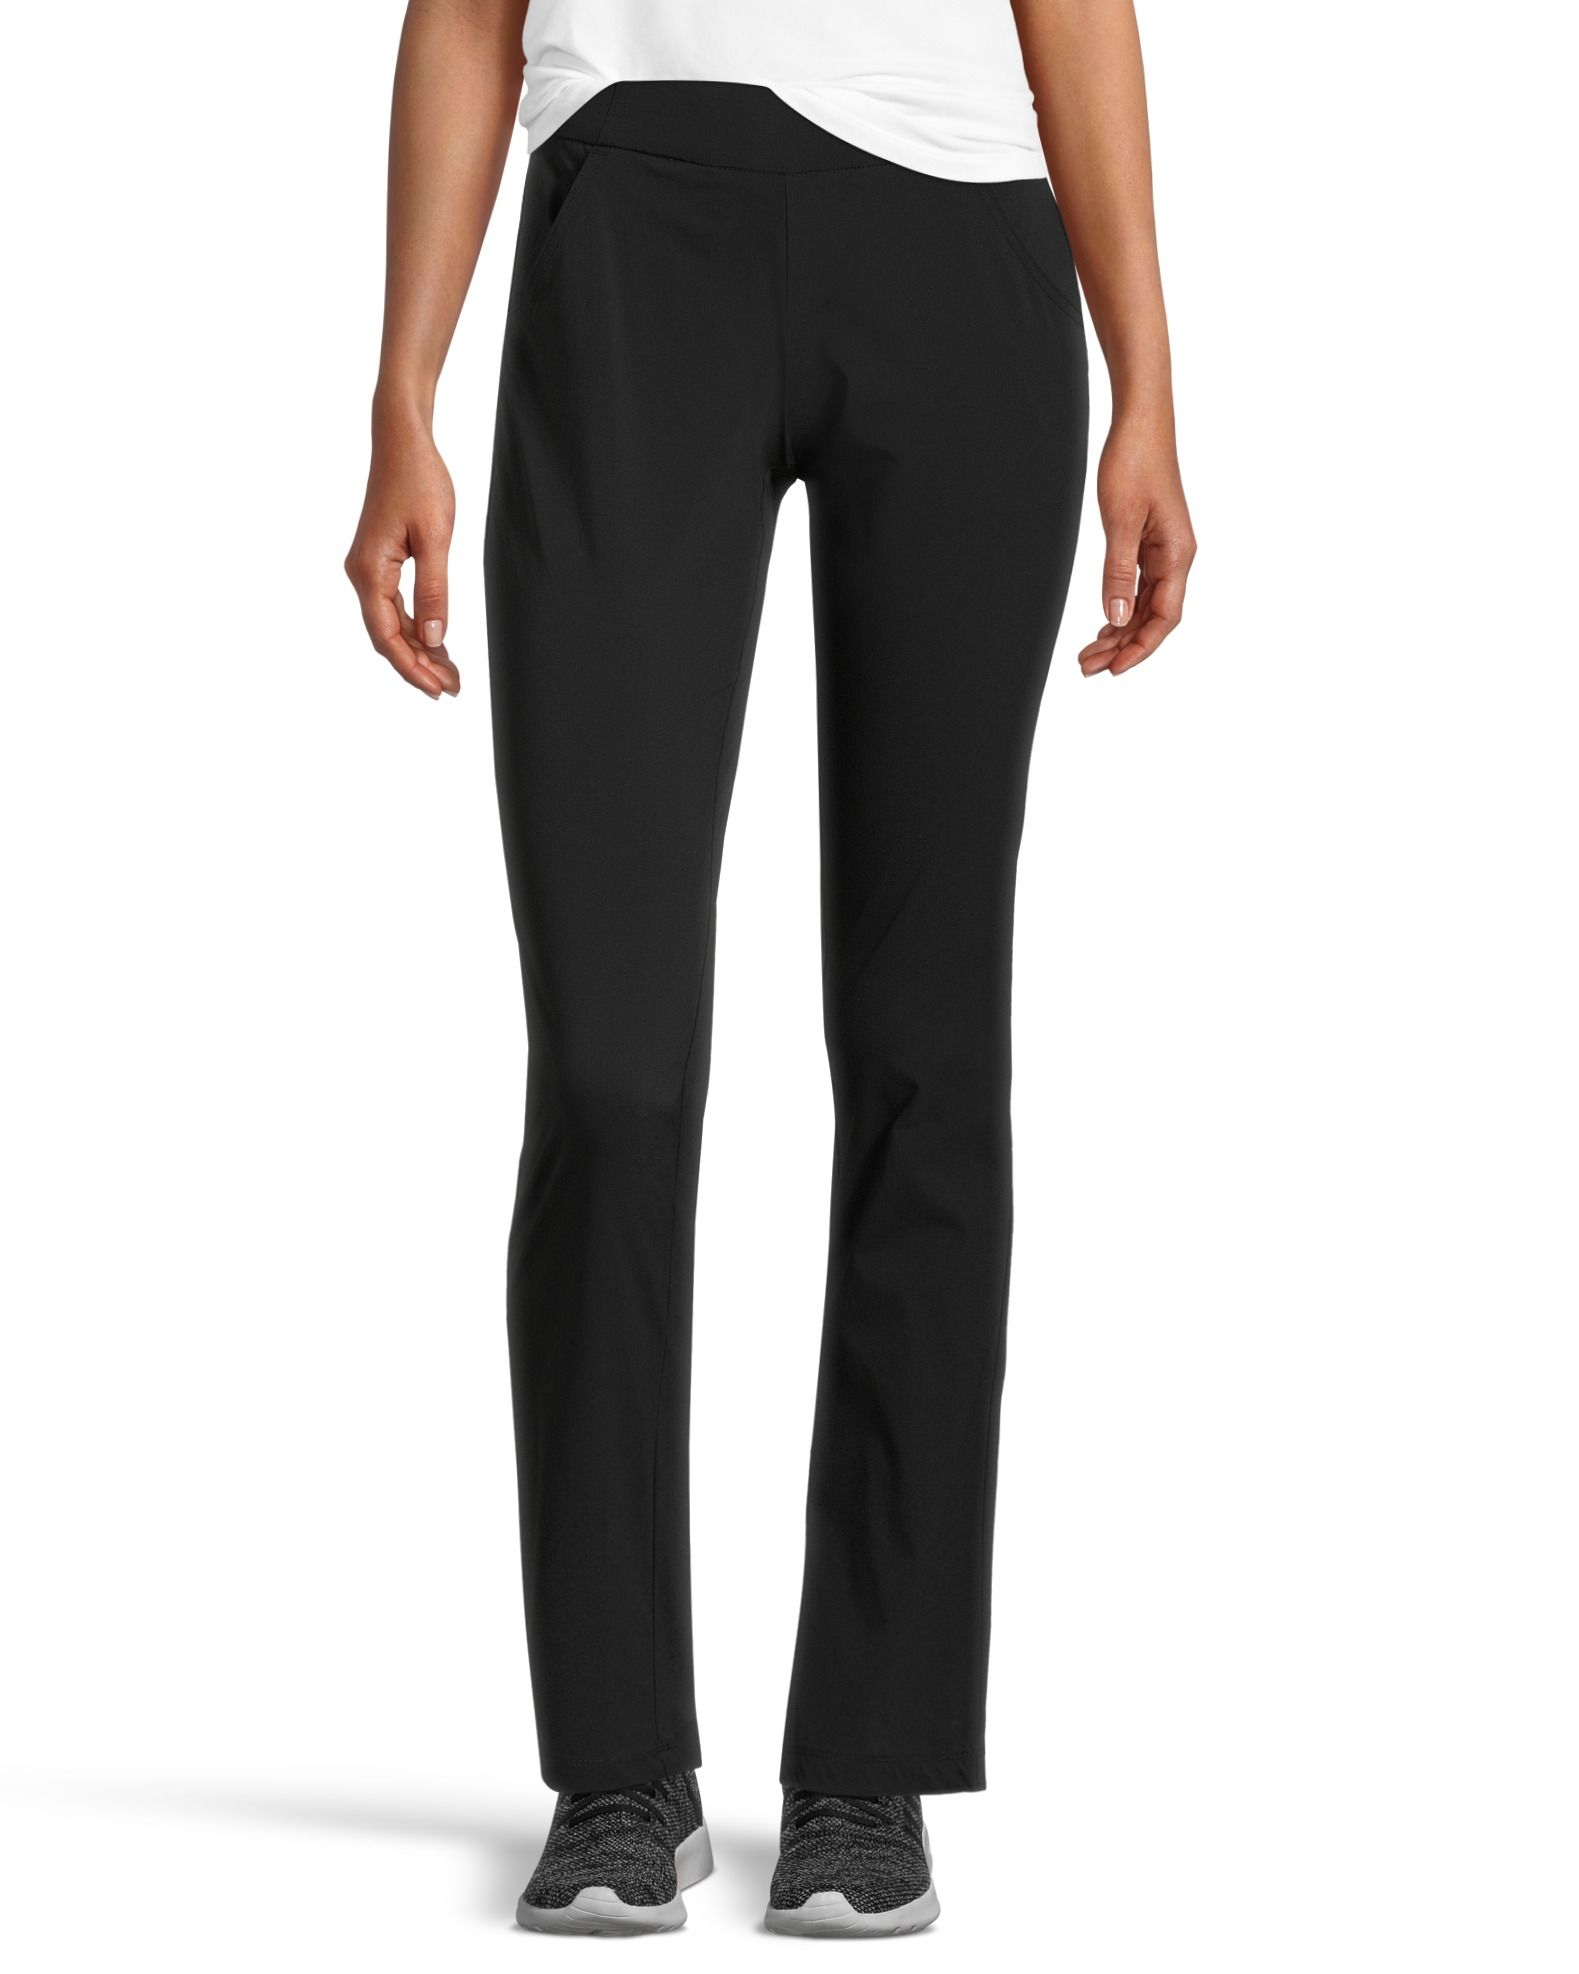 Columbia Anytime Casual Pull-On Pants Black